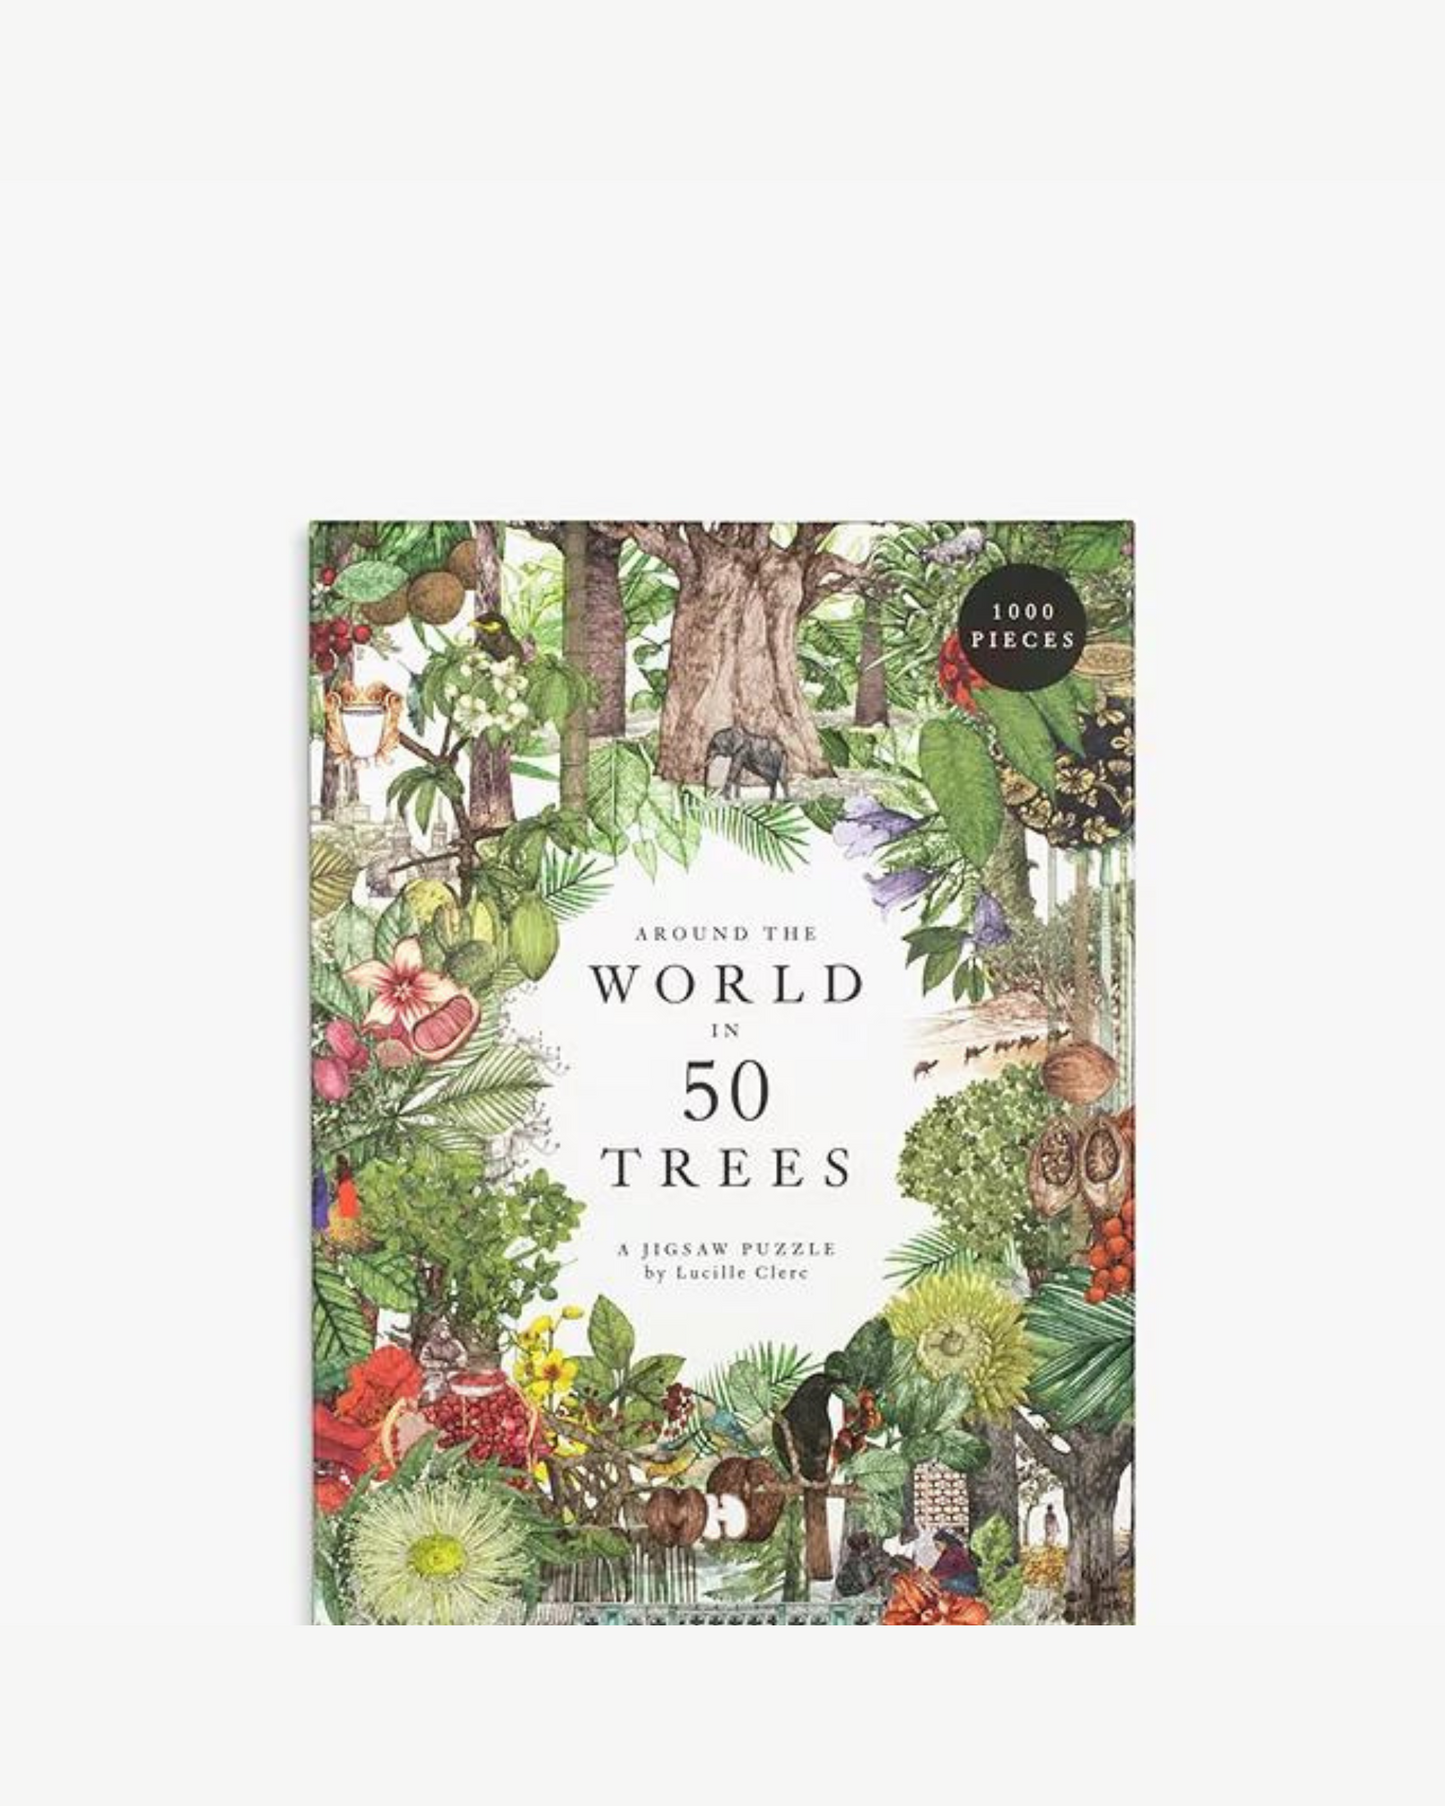 Around the world in 50 trees 1000 piece jigsaw puzzle